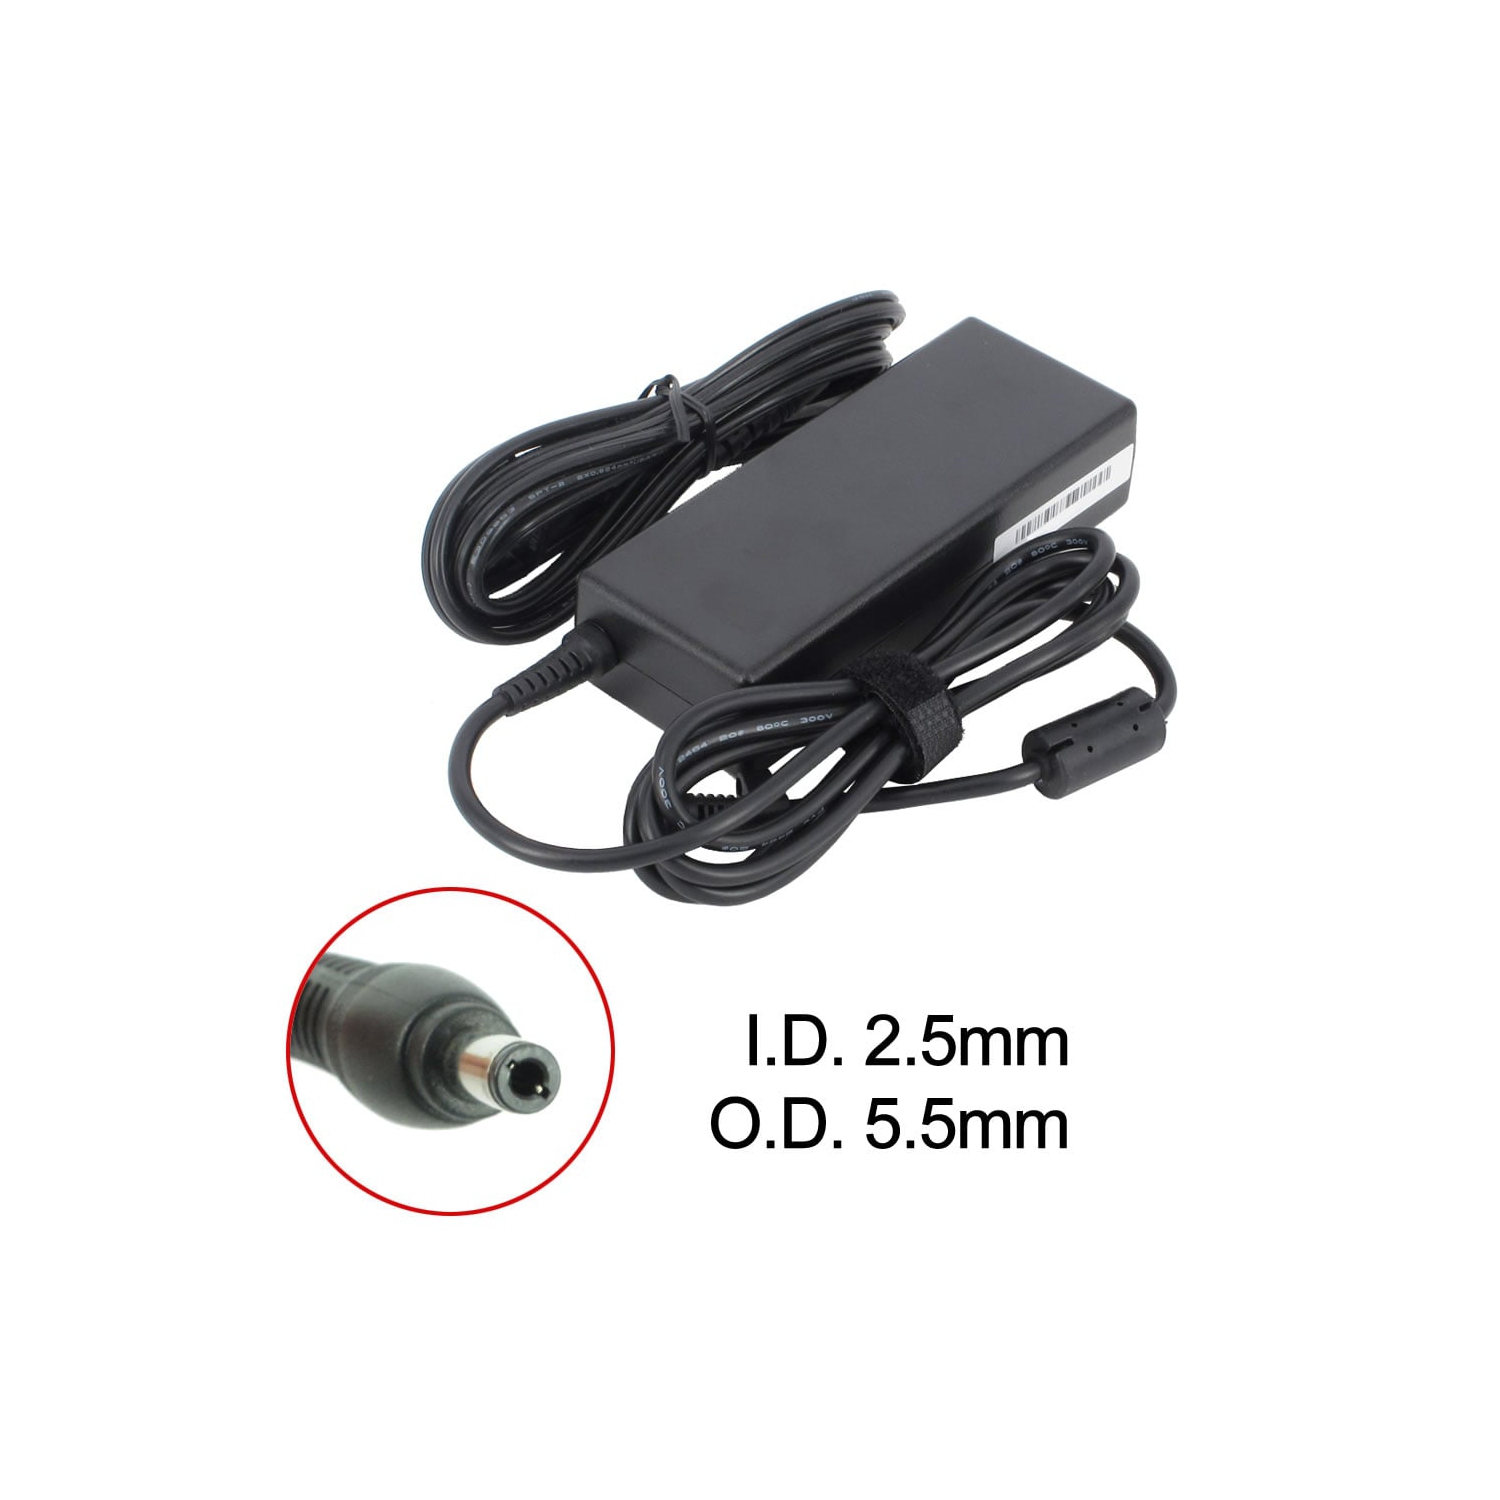 BATTDEPOT New Laptop AC Adapter for NEC LS46H/24DW 103942 808-875692-010A 9T458 ADP-65 HB BBEF PA-1900-36 SA80-3115